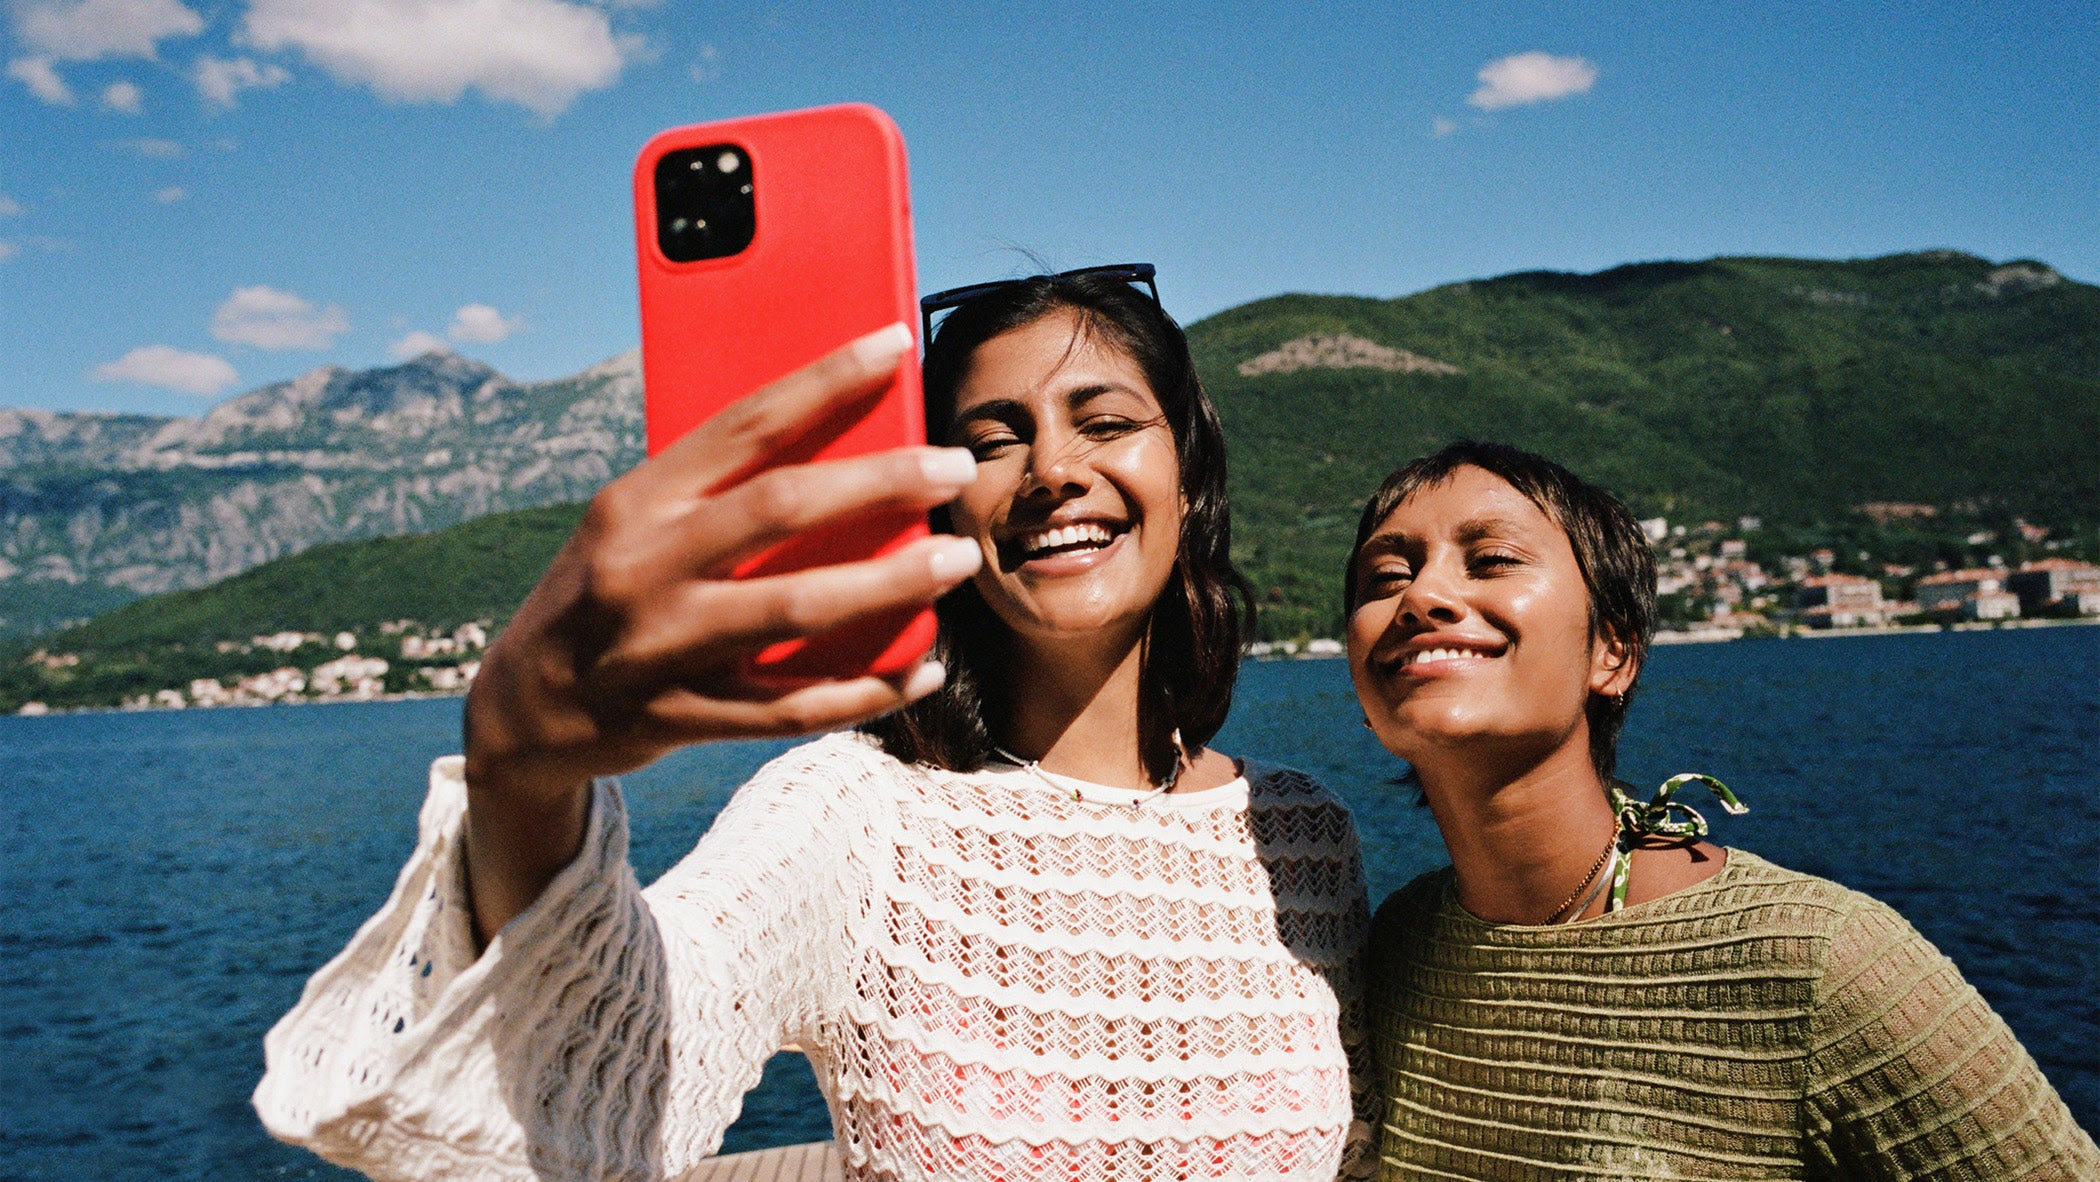 two women smiling and taking a selfie on vacation.